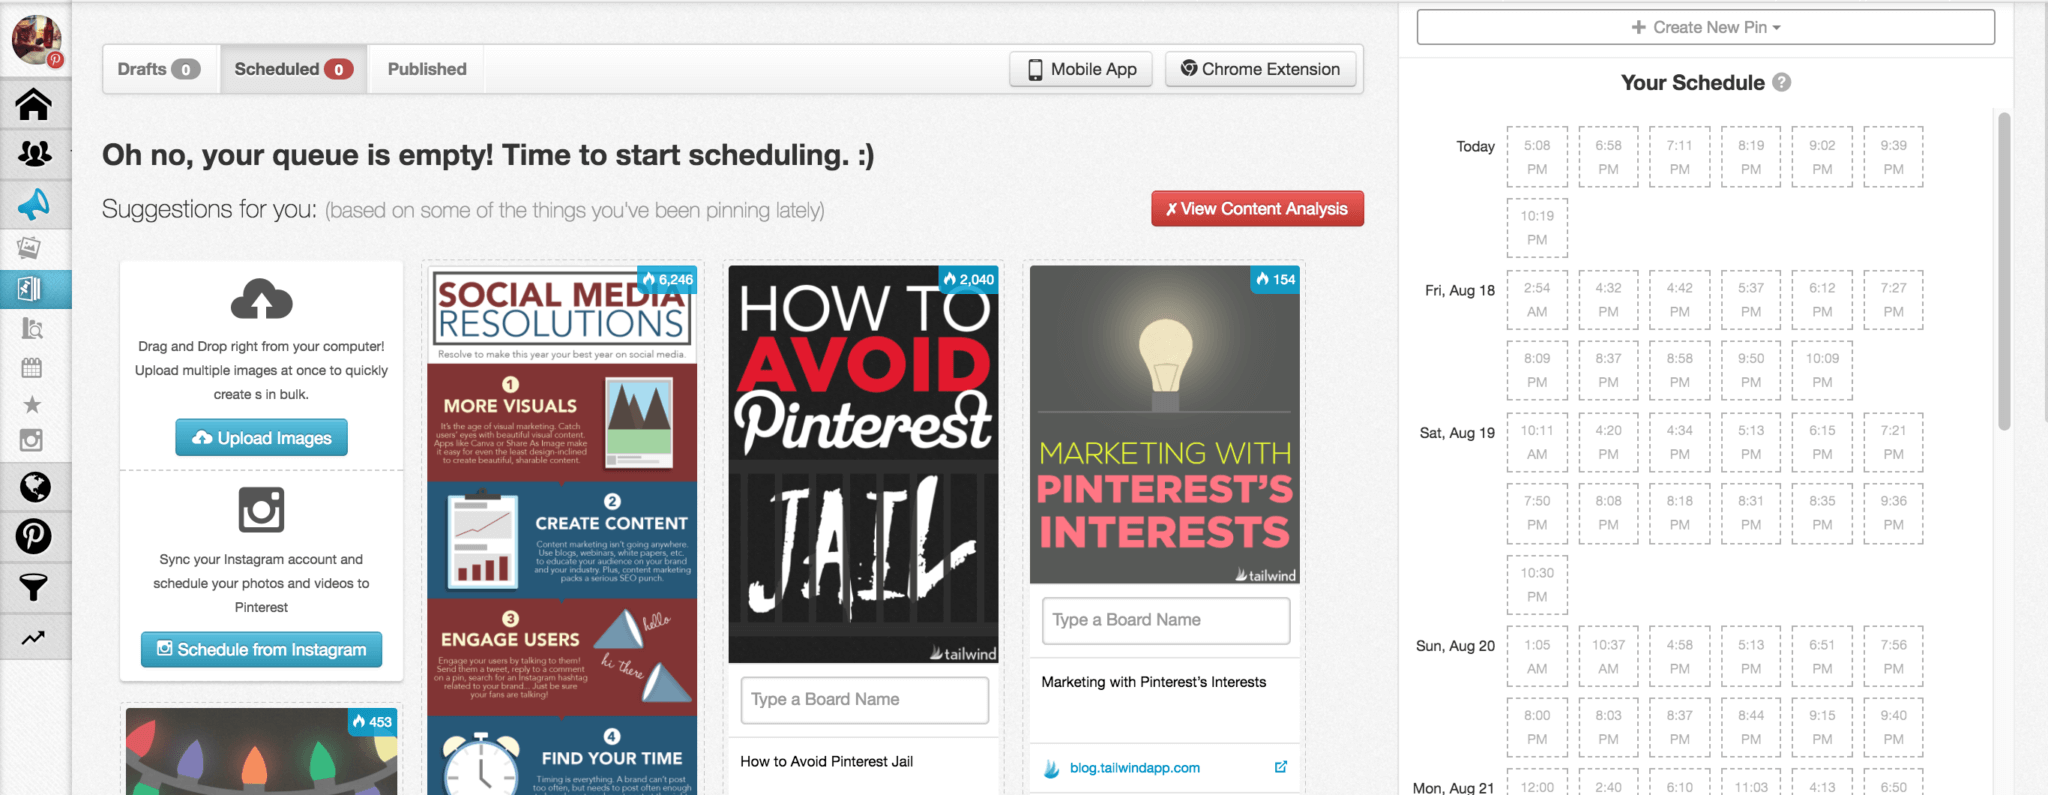 Tailwind SmartSchedule knows the best times for you to Pin to Pinterest